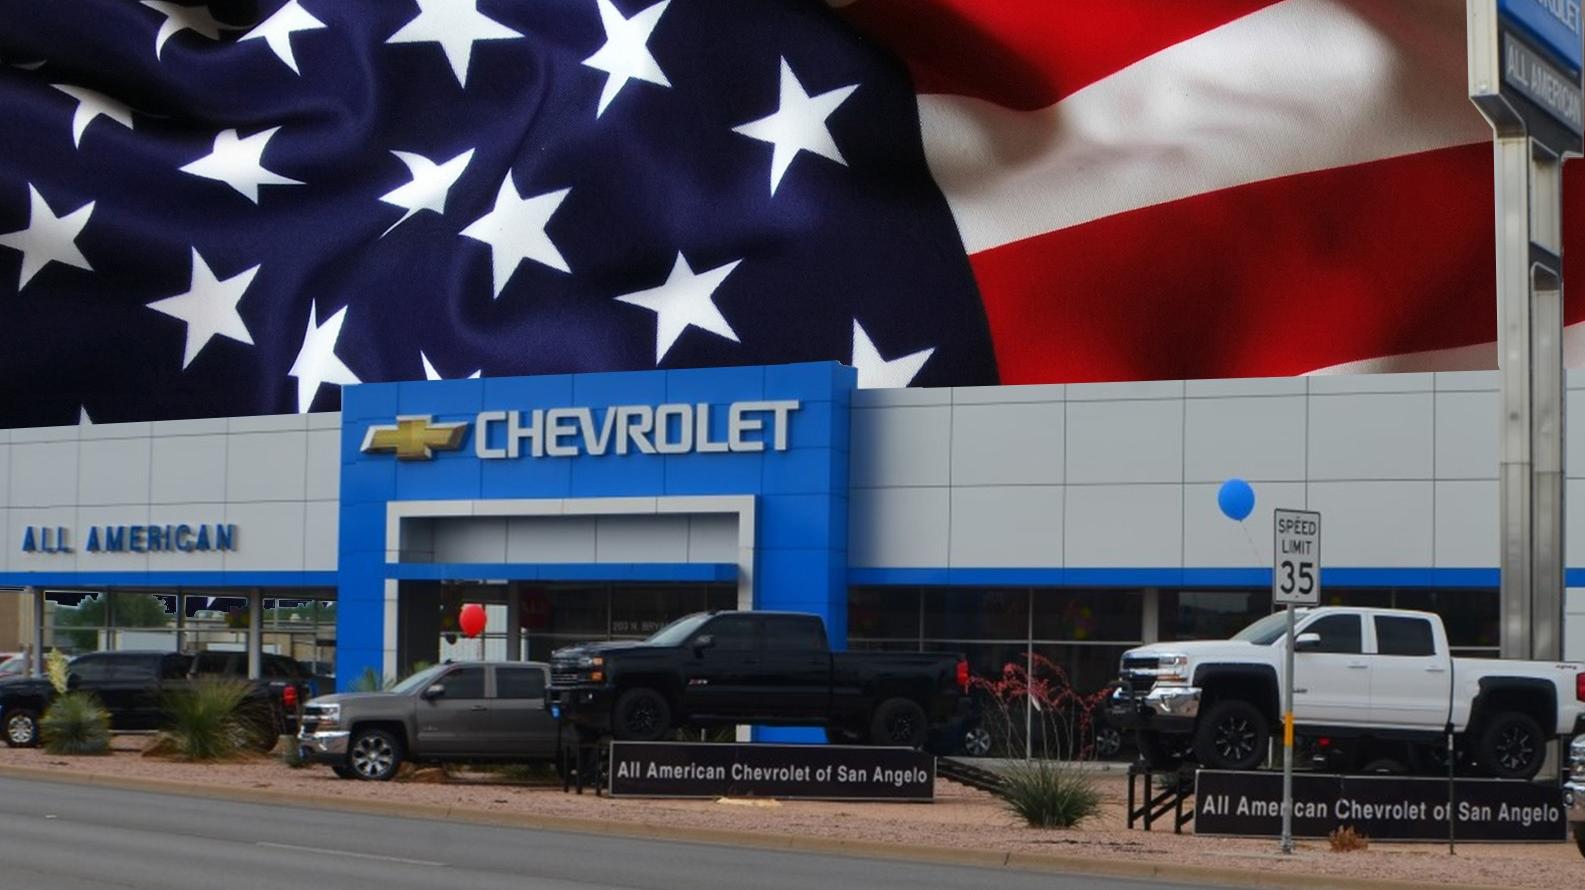 All American Chevrolet of San Angelo